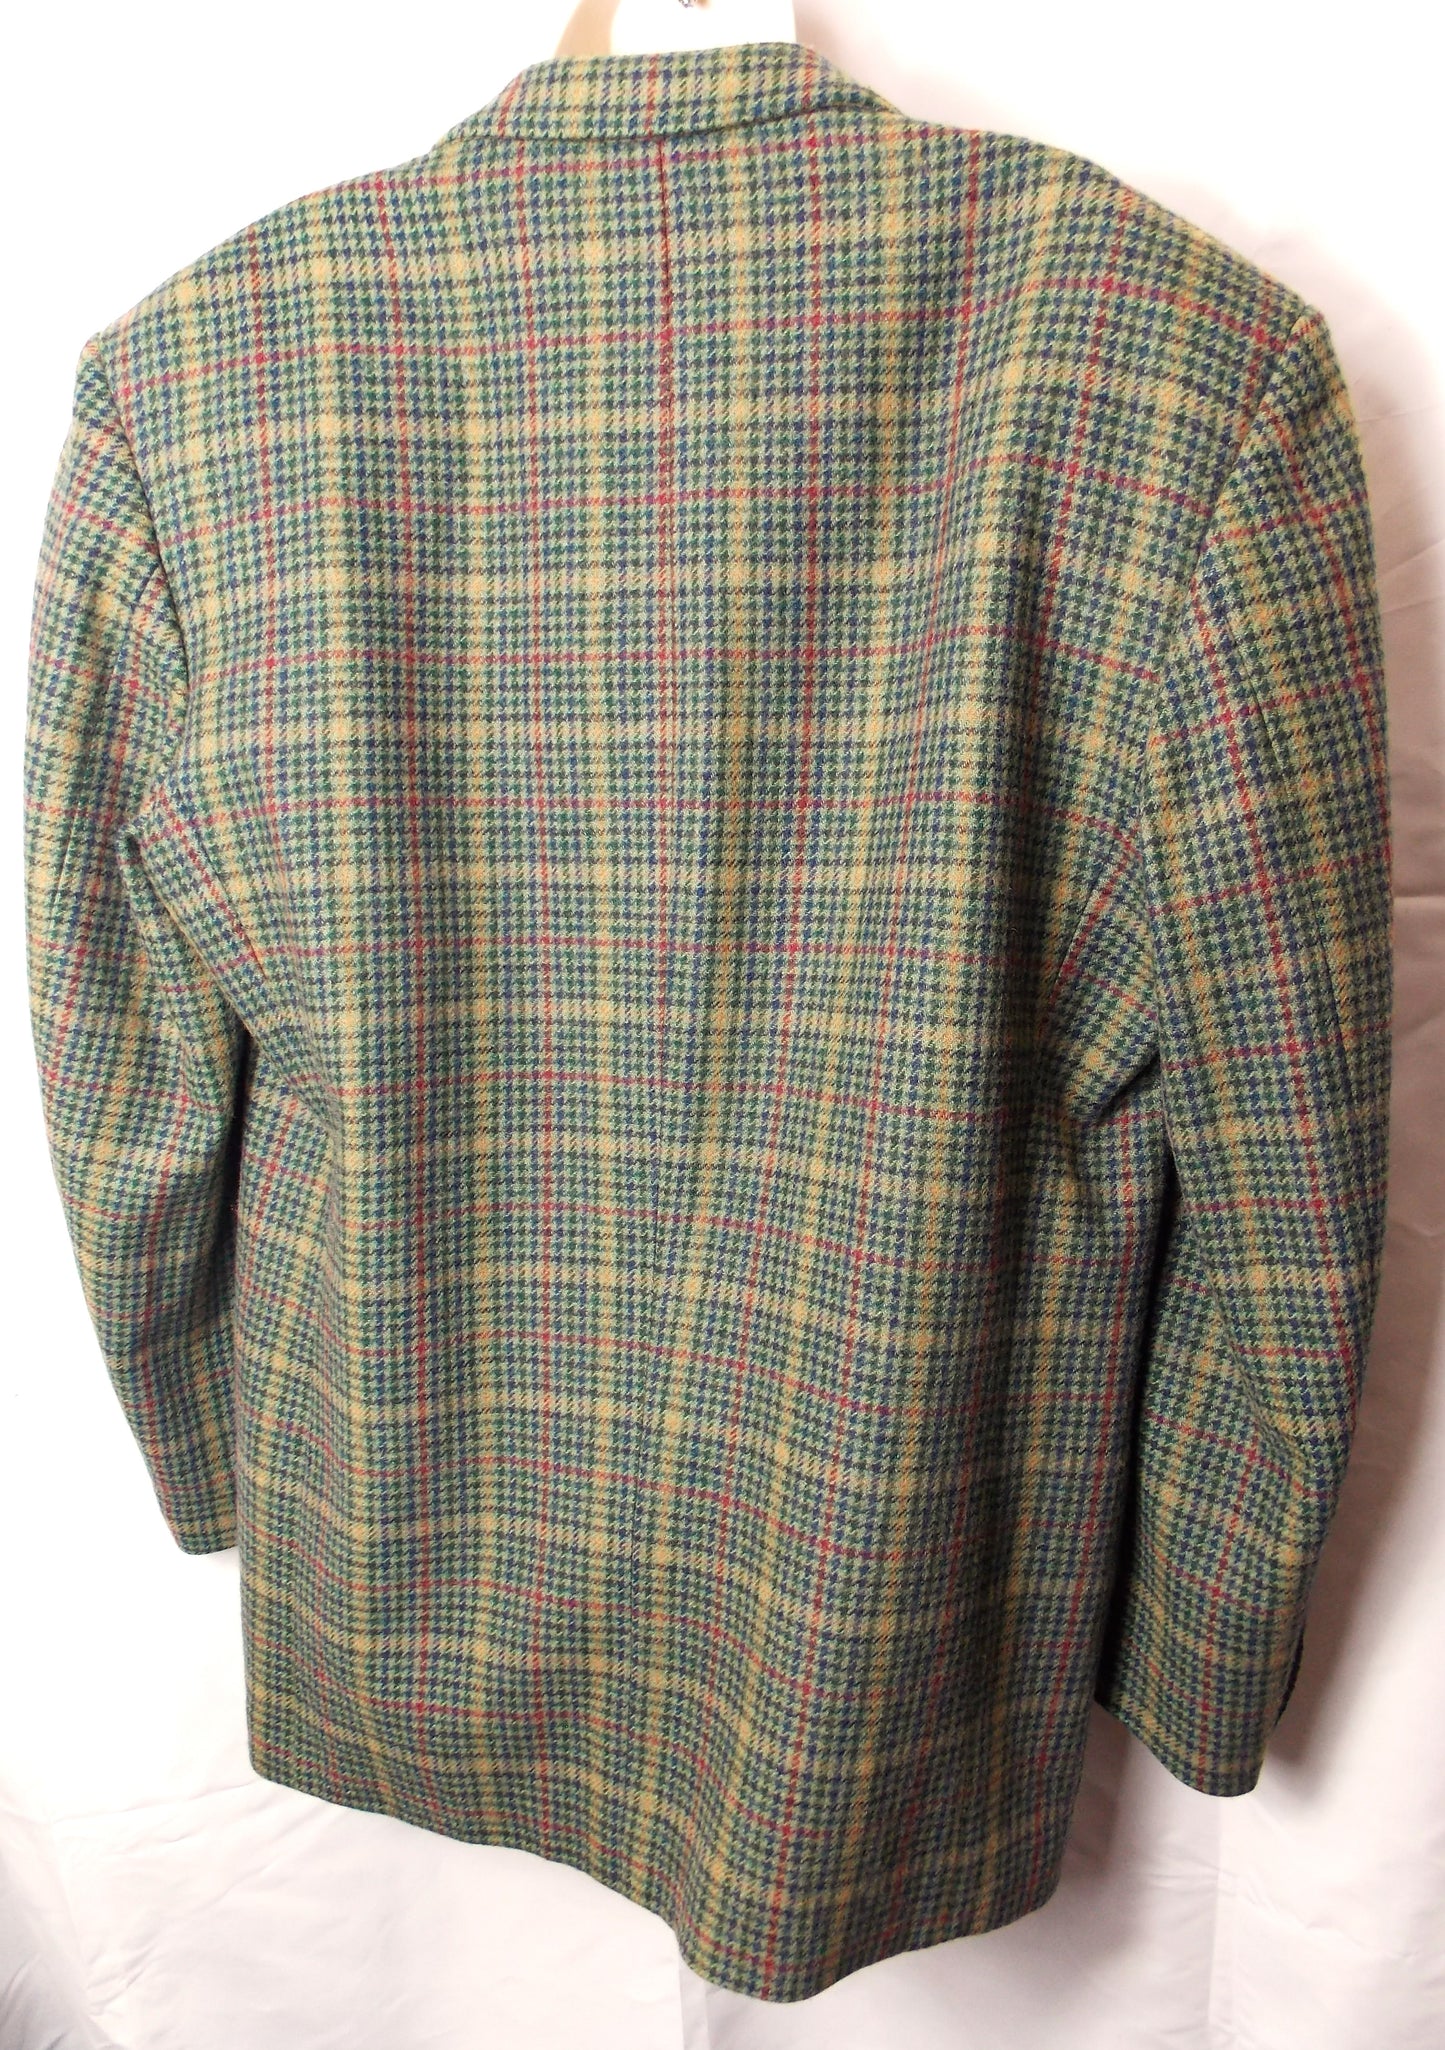 Wool Prince of Wales Check Sports Jacket.